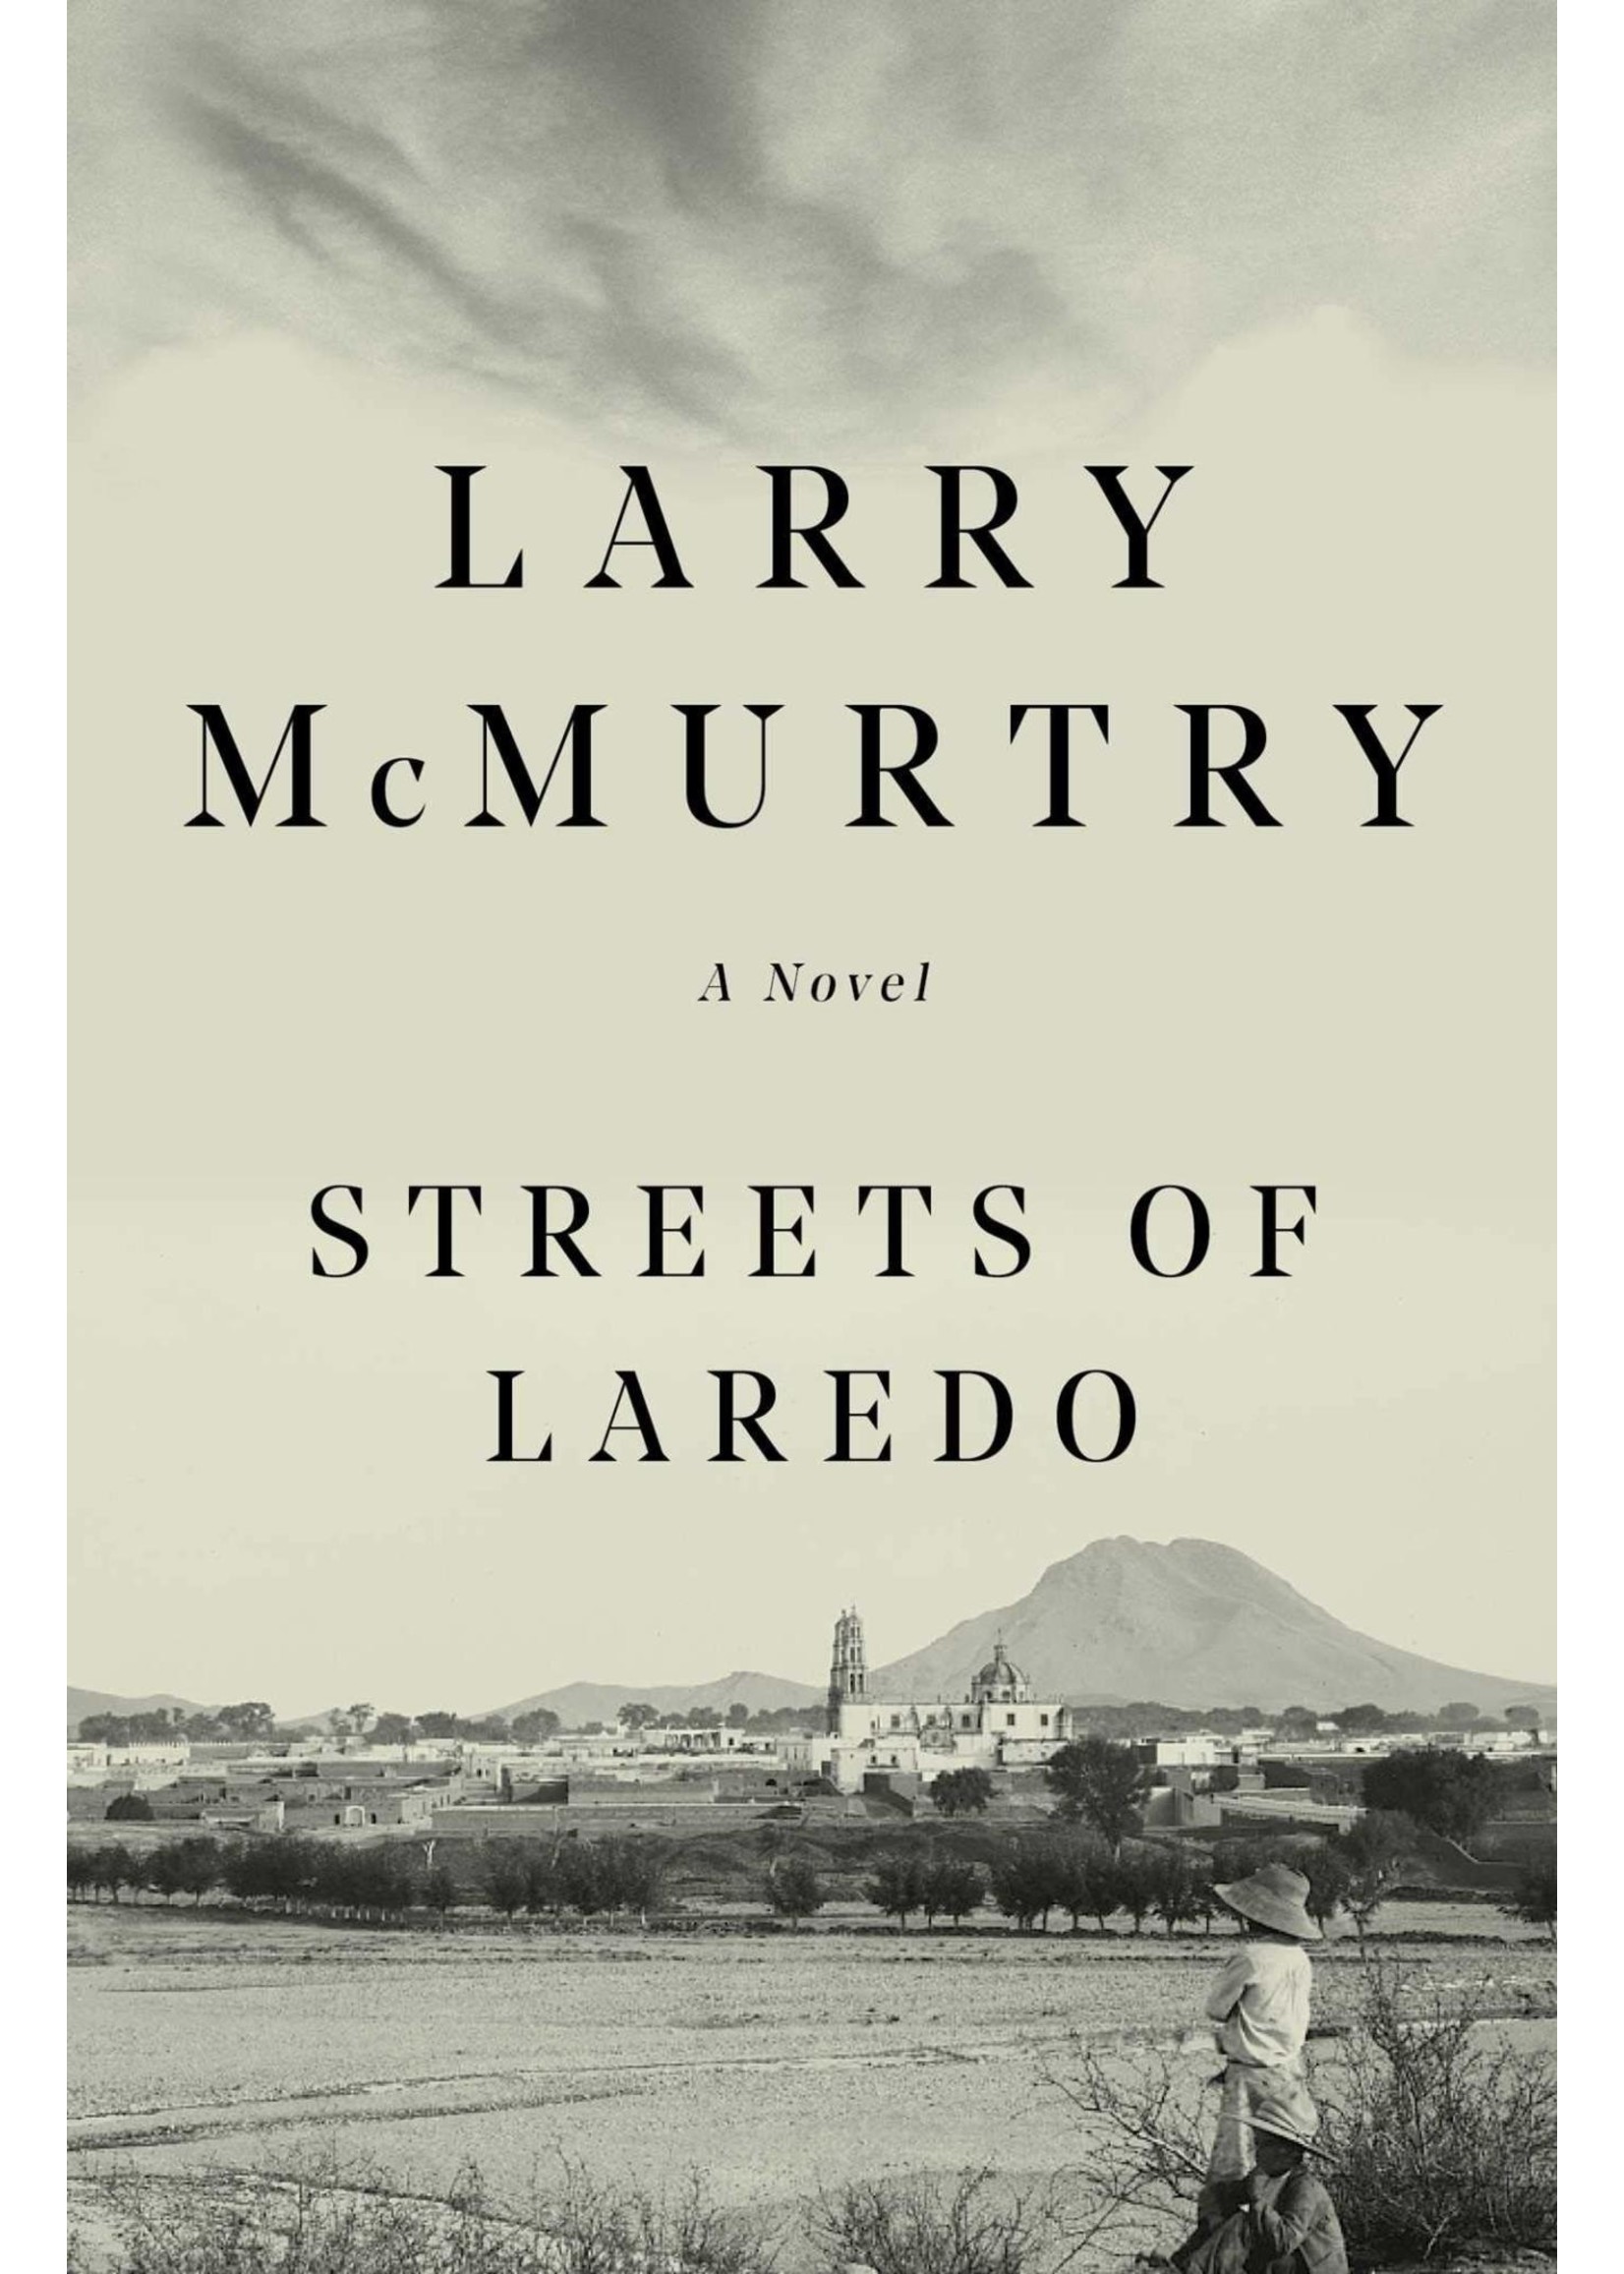 Streets of Laredo (Lonesome Dove #2) by Larry McMurtry